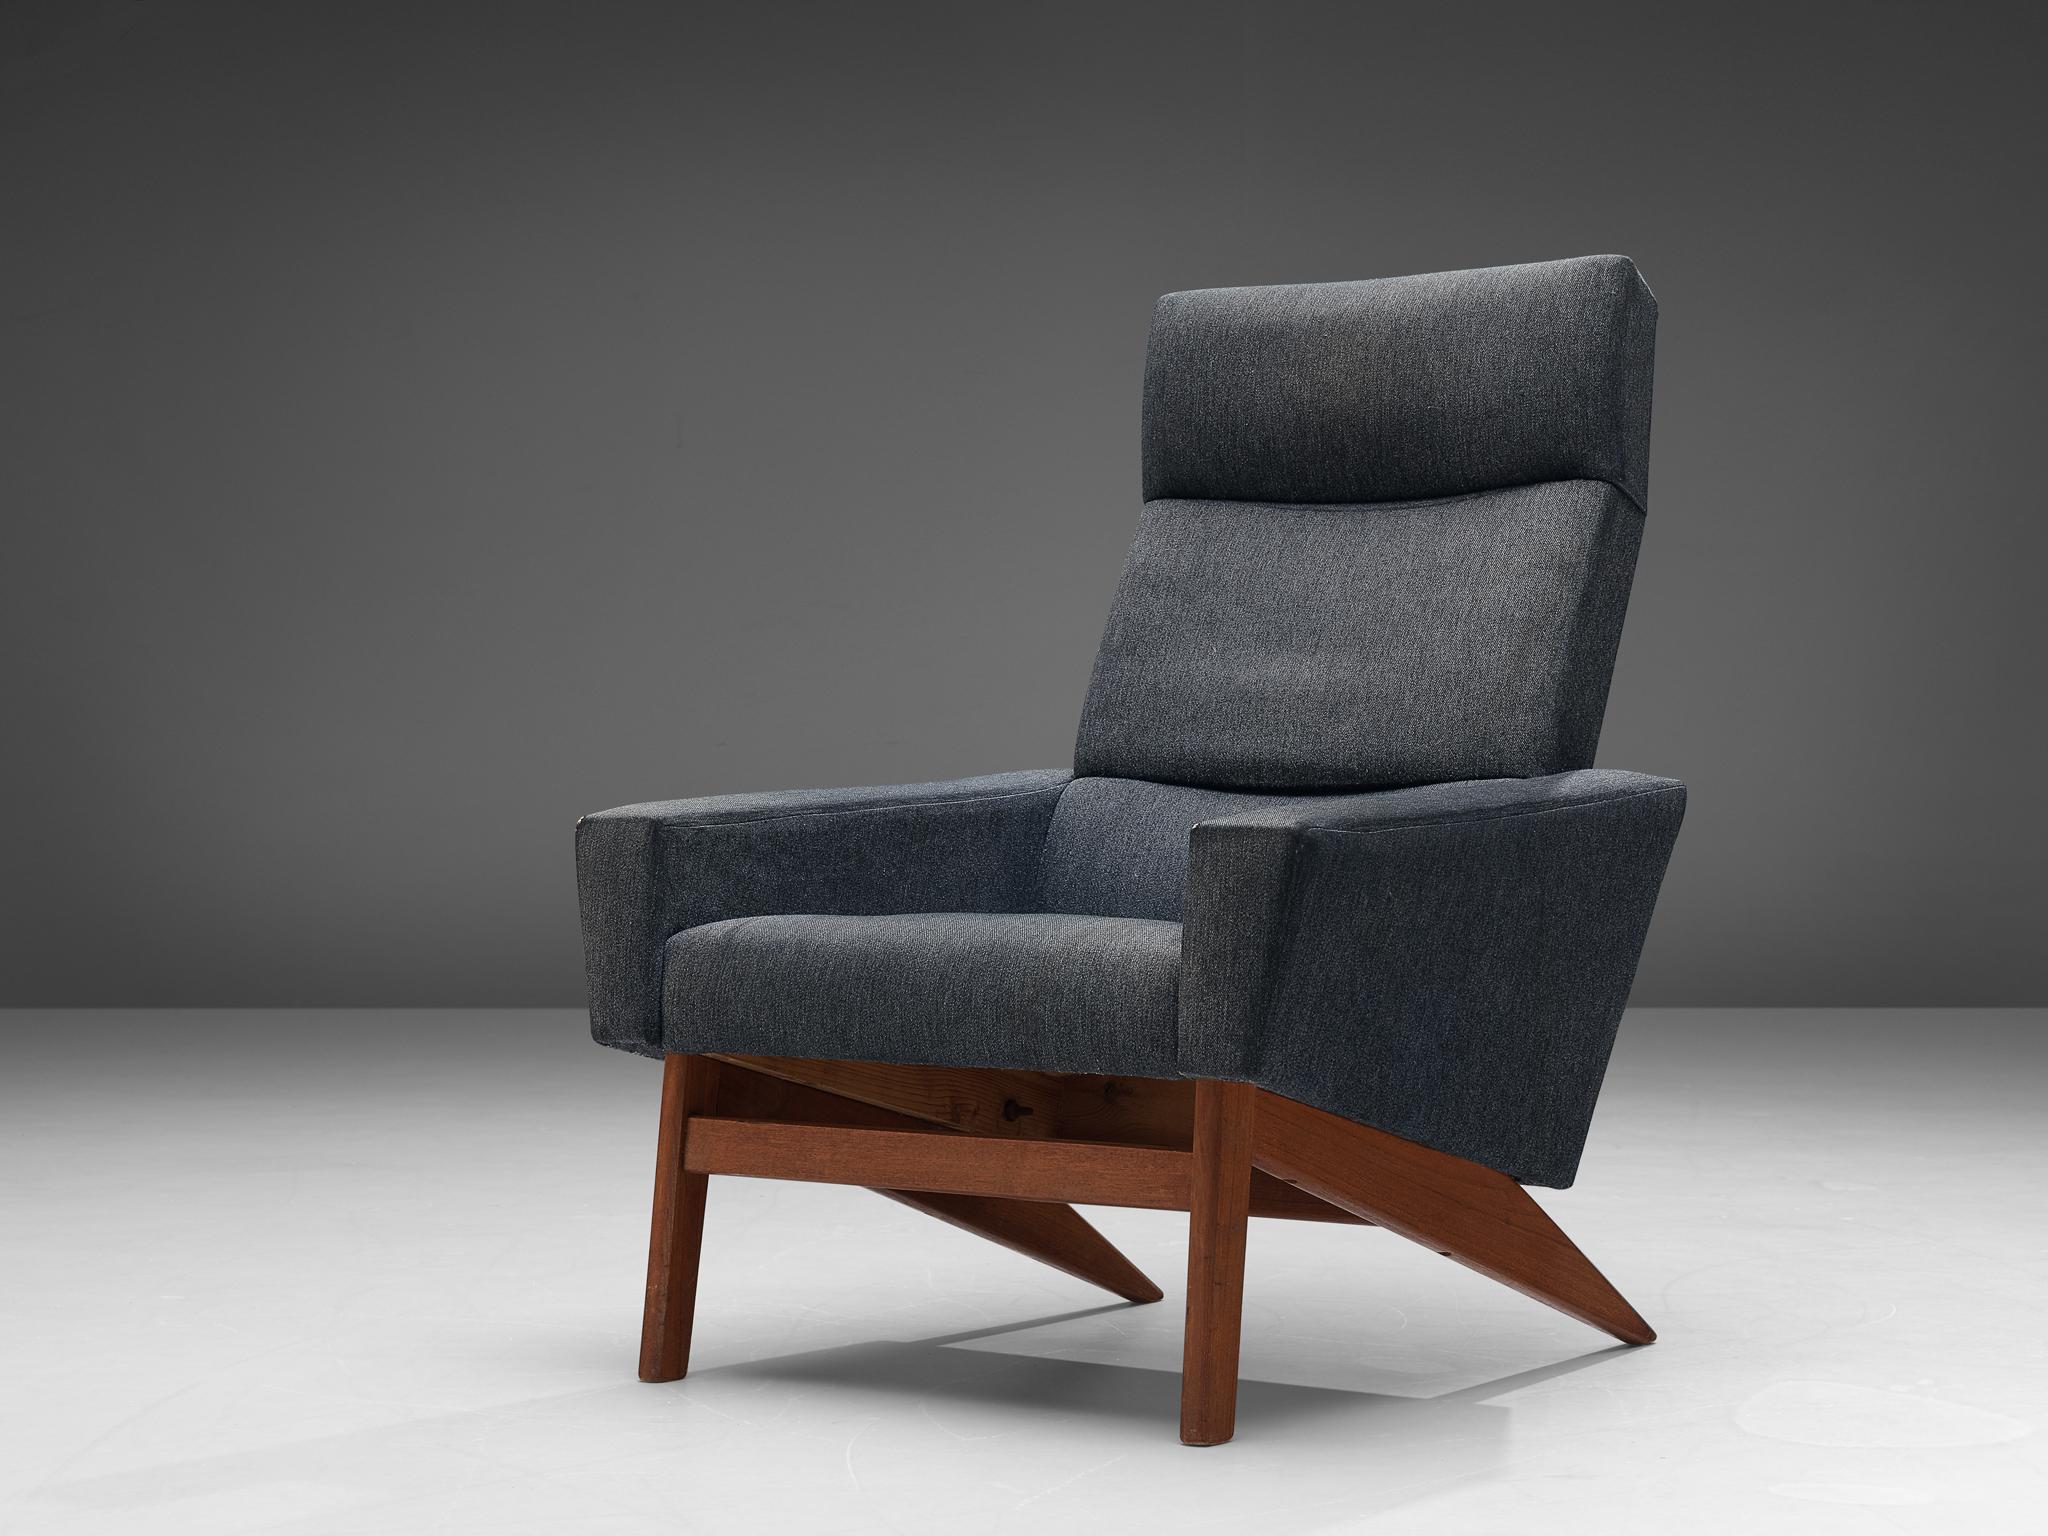 High back lounge chair, grey fabric upholstery, teak, Denmark, 1960s

Danish high back lounge chair in grey fabric upholstery. This comfortable chair features clean lines and comfortable upholstered seating. The sloping rectangular armrest are